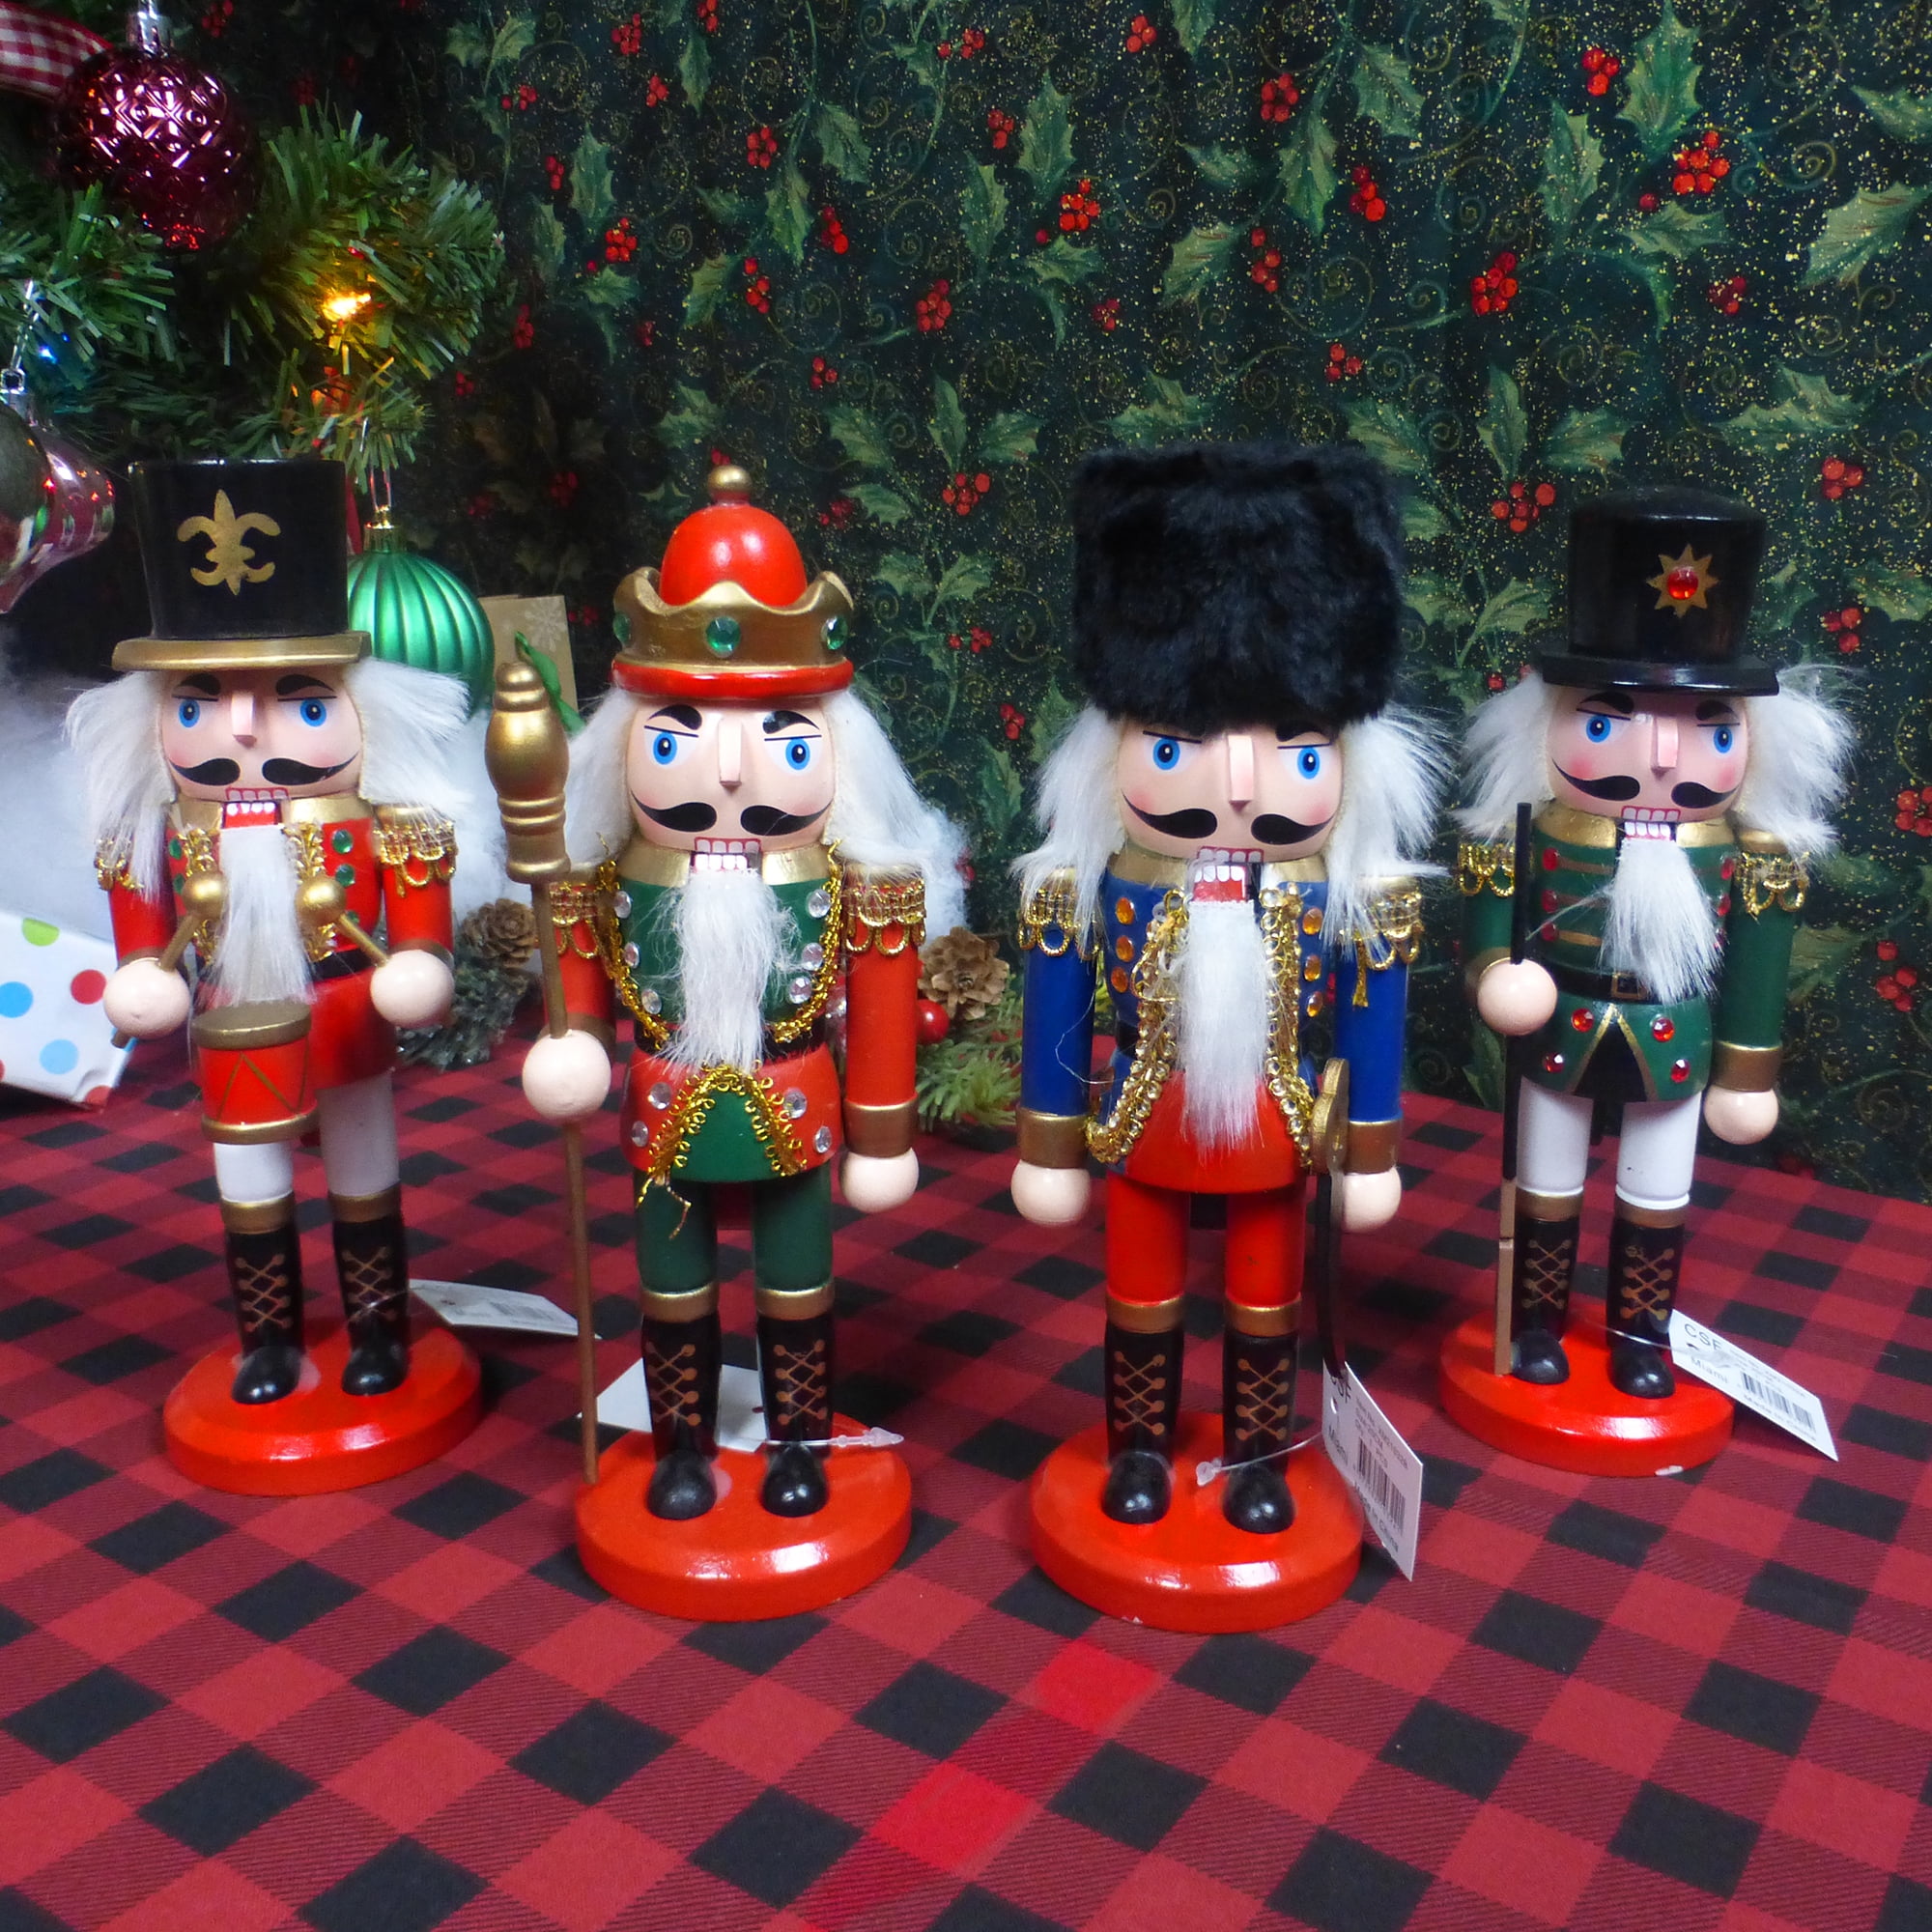 8 Nutcracker Christmas Decoration (Set of 4) - Traditional Wooden King,  Soldier, Drummer, & Gunner Styles. For Friends, Family, and Coworkers. 